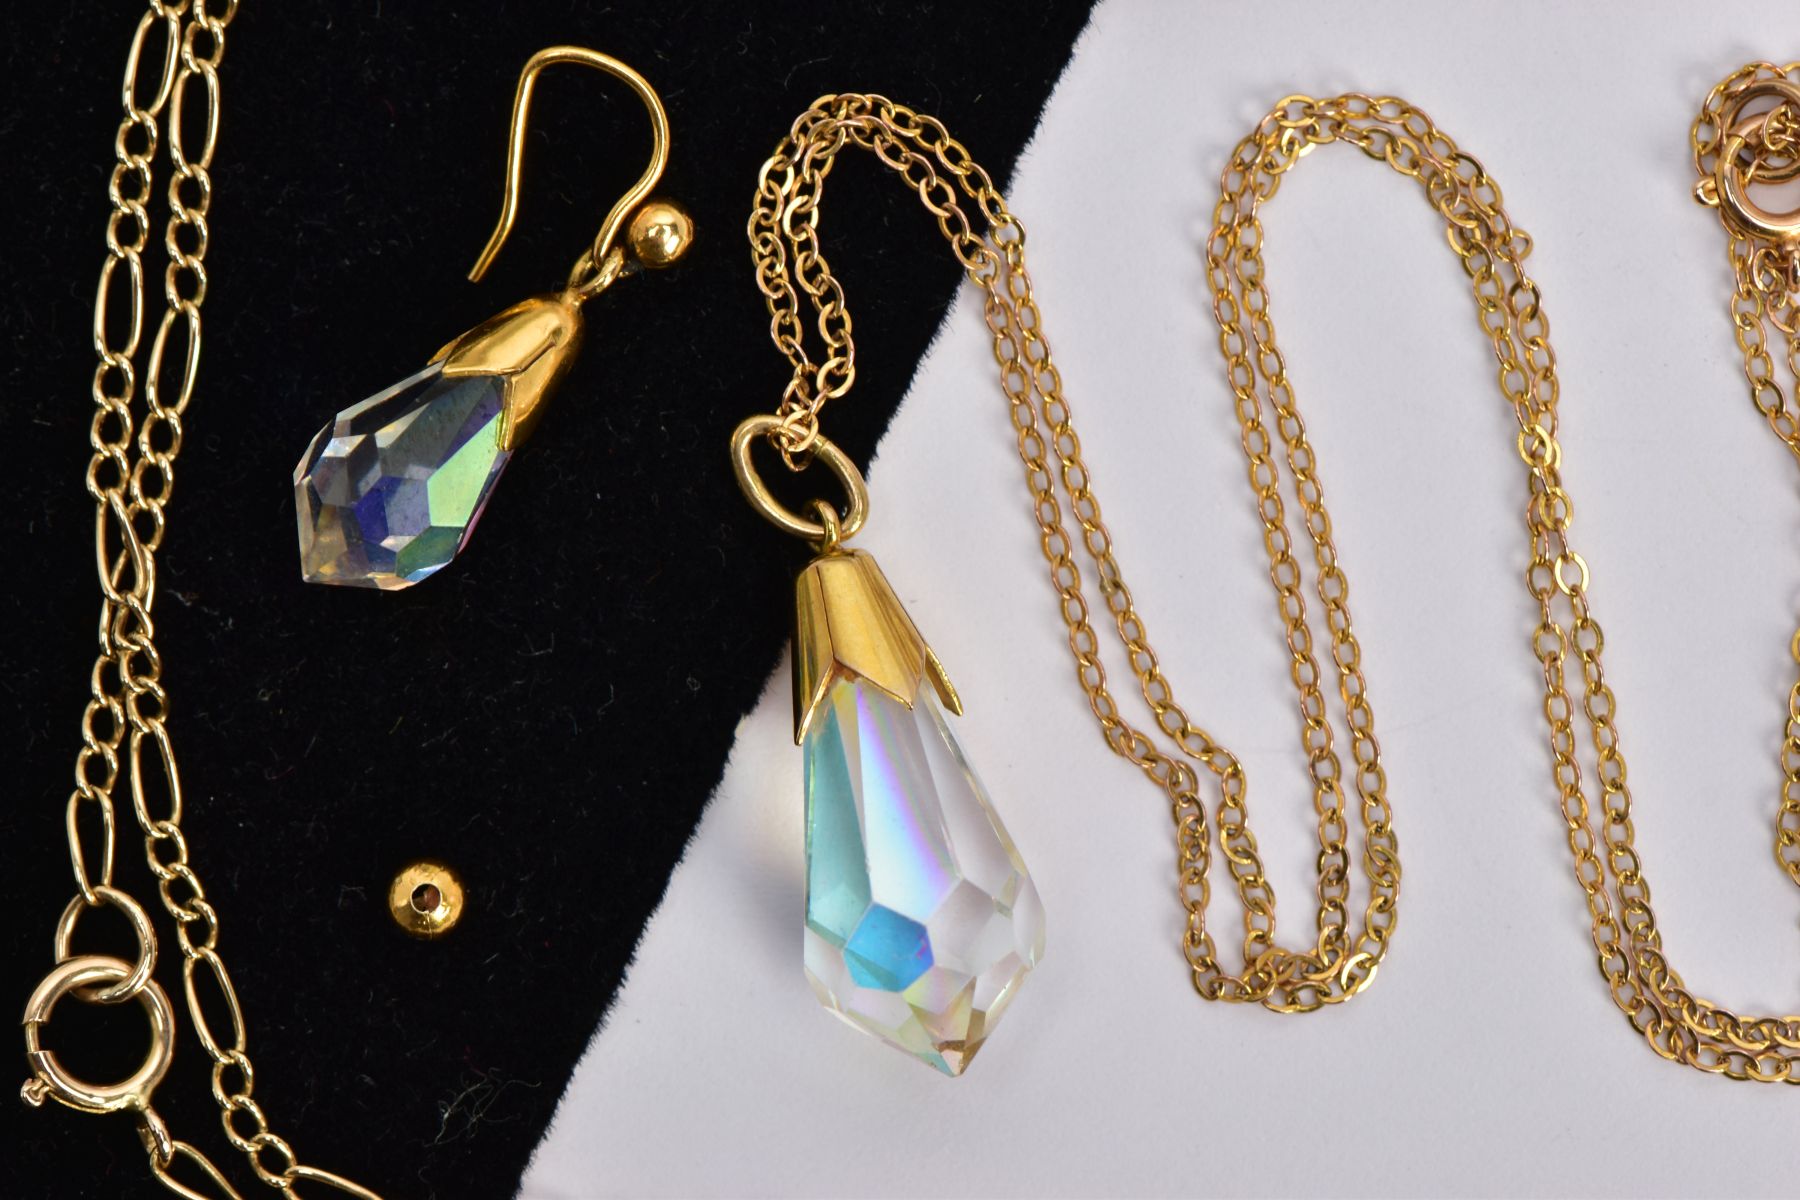 A 9CT GOLD CRYSTAL NECKLACE AND EARRING SET AND A YELLOW METAL CHAIN, a briolette faceted crystal - Image 3 of 3